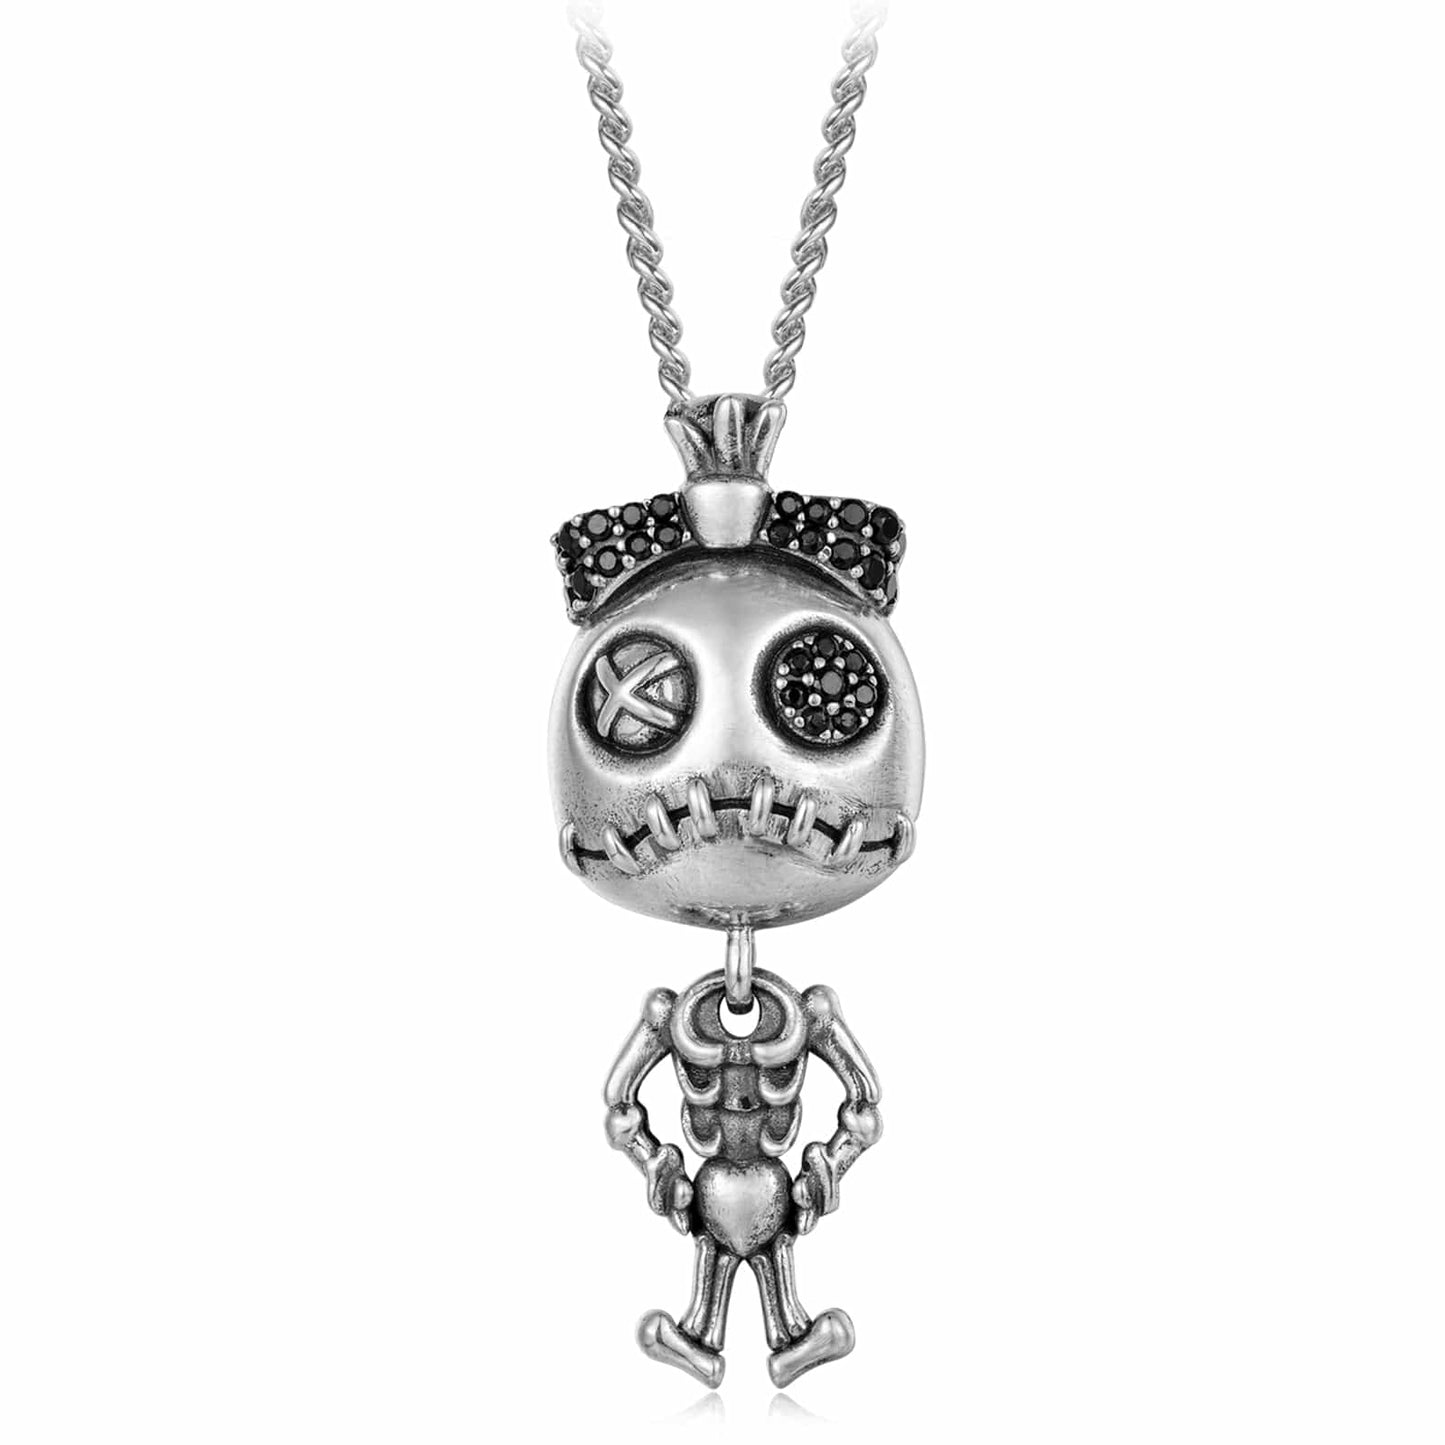 Limited Edition Flash Sale: Hauntingly Beautiful Halloween-themed Zombie Bride Necklace in 925 Sterling Silver with Antique Finish!